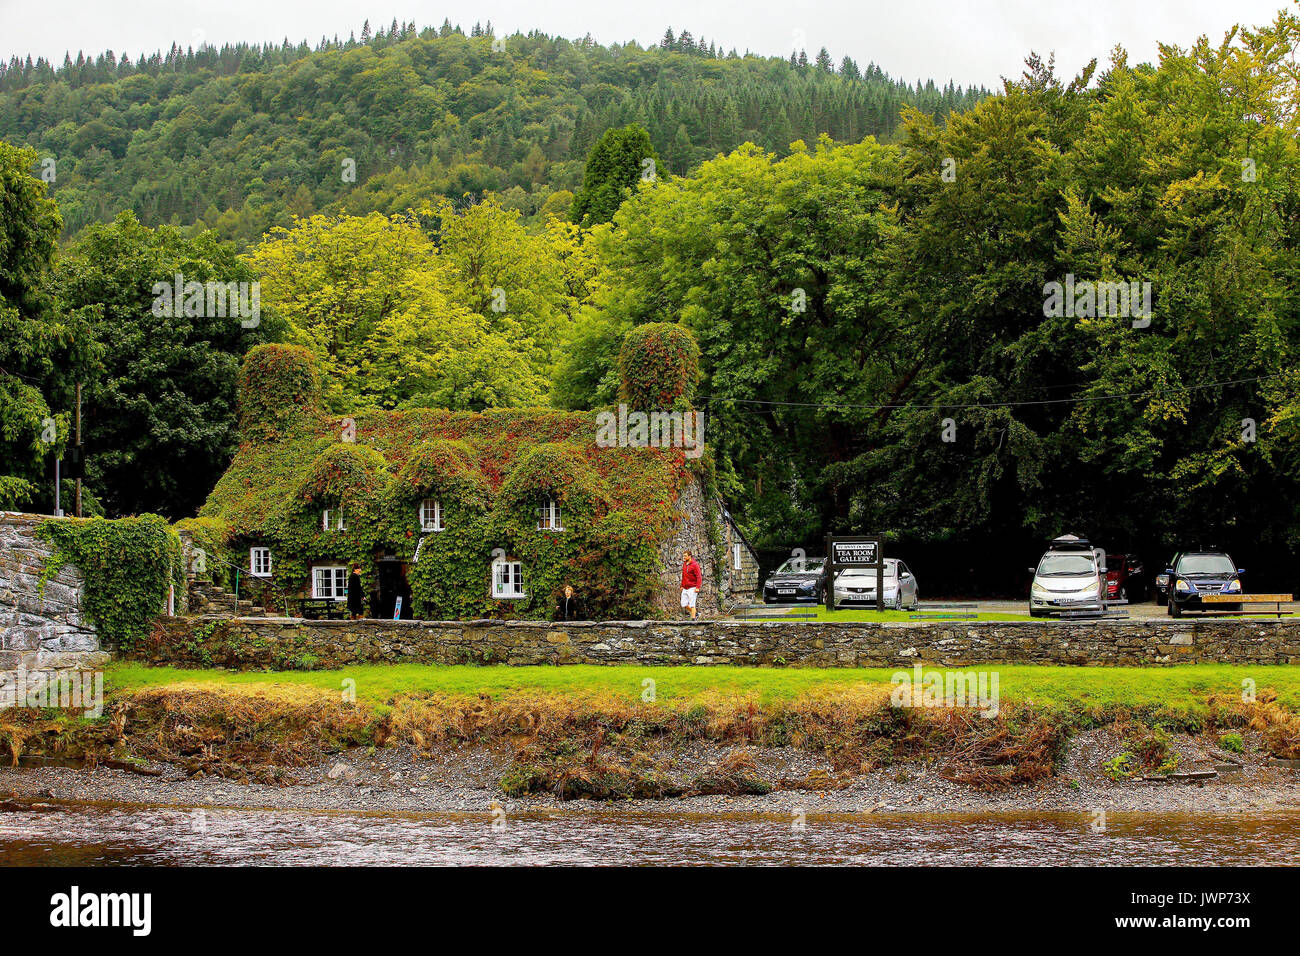 Tu Hwnt ir Bont Tea Rooms in Llanrwst, North Wales, which is covered in Virginia Creeper and has started its Autumnal change in colour early with the green leaves normally turning red by mid-Autumn. Stock Photo